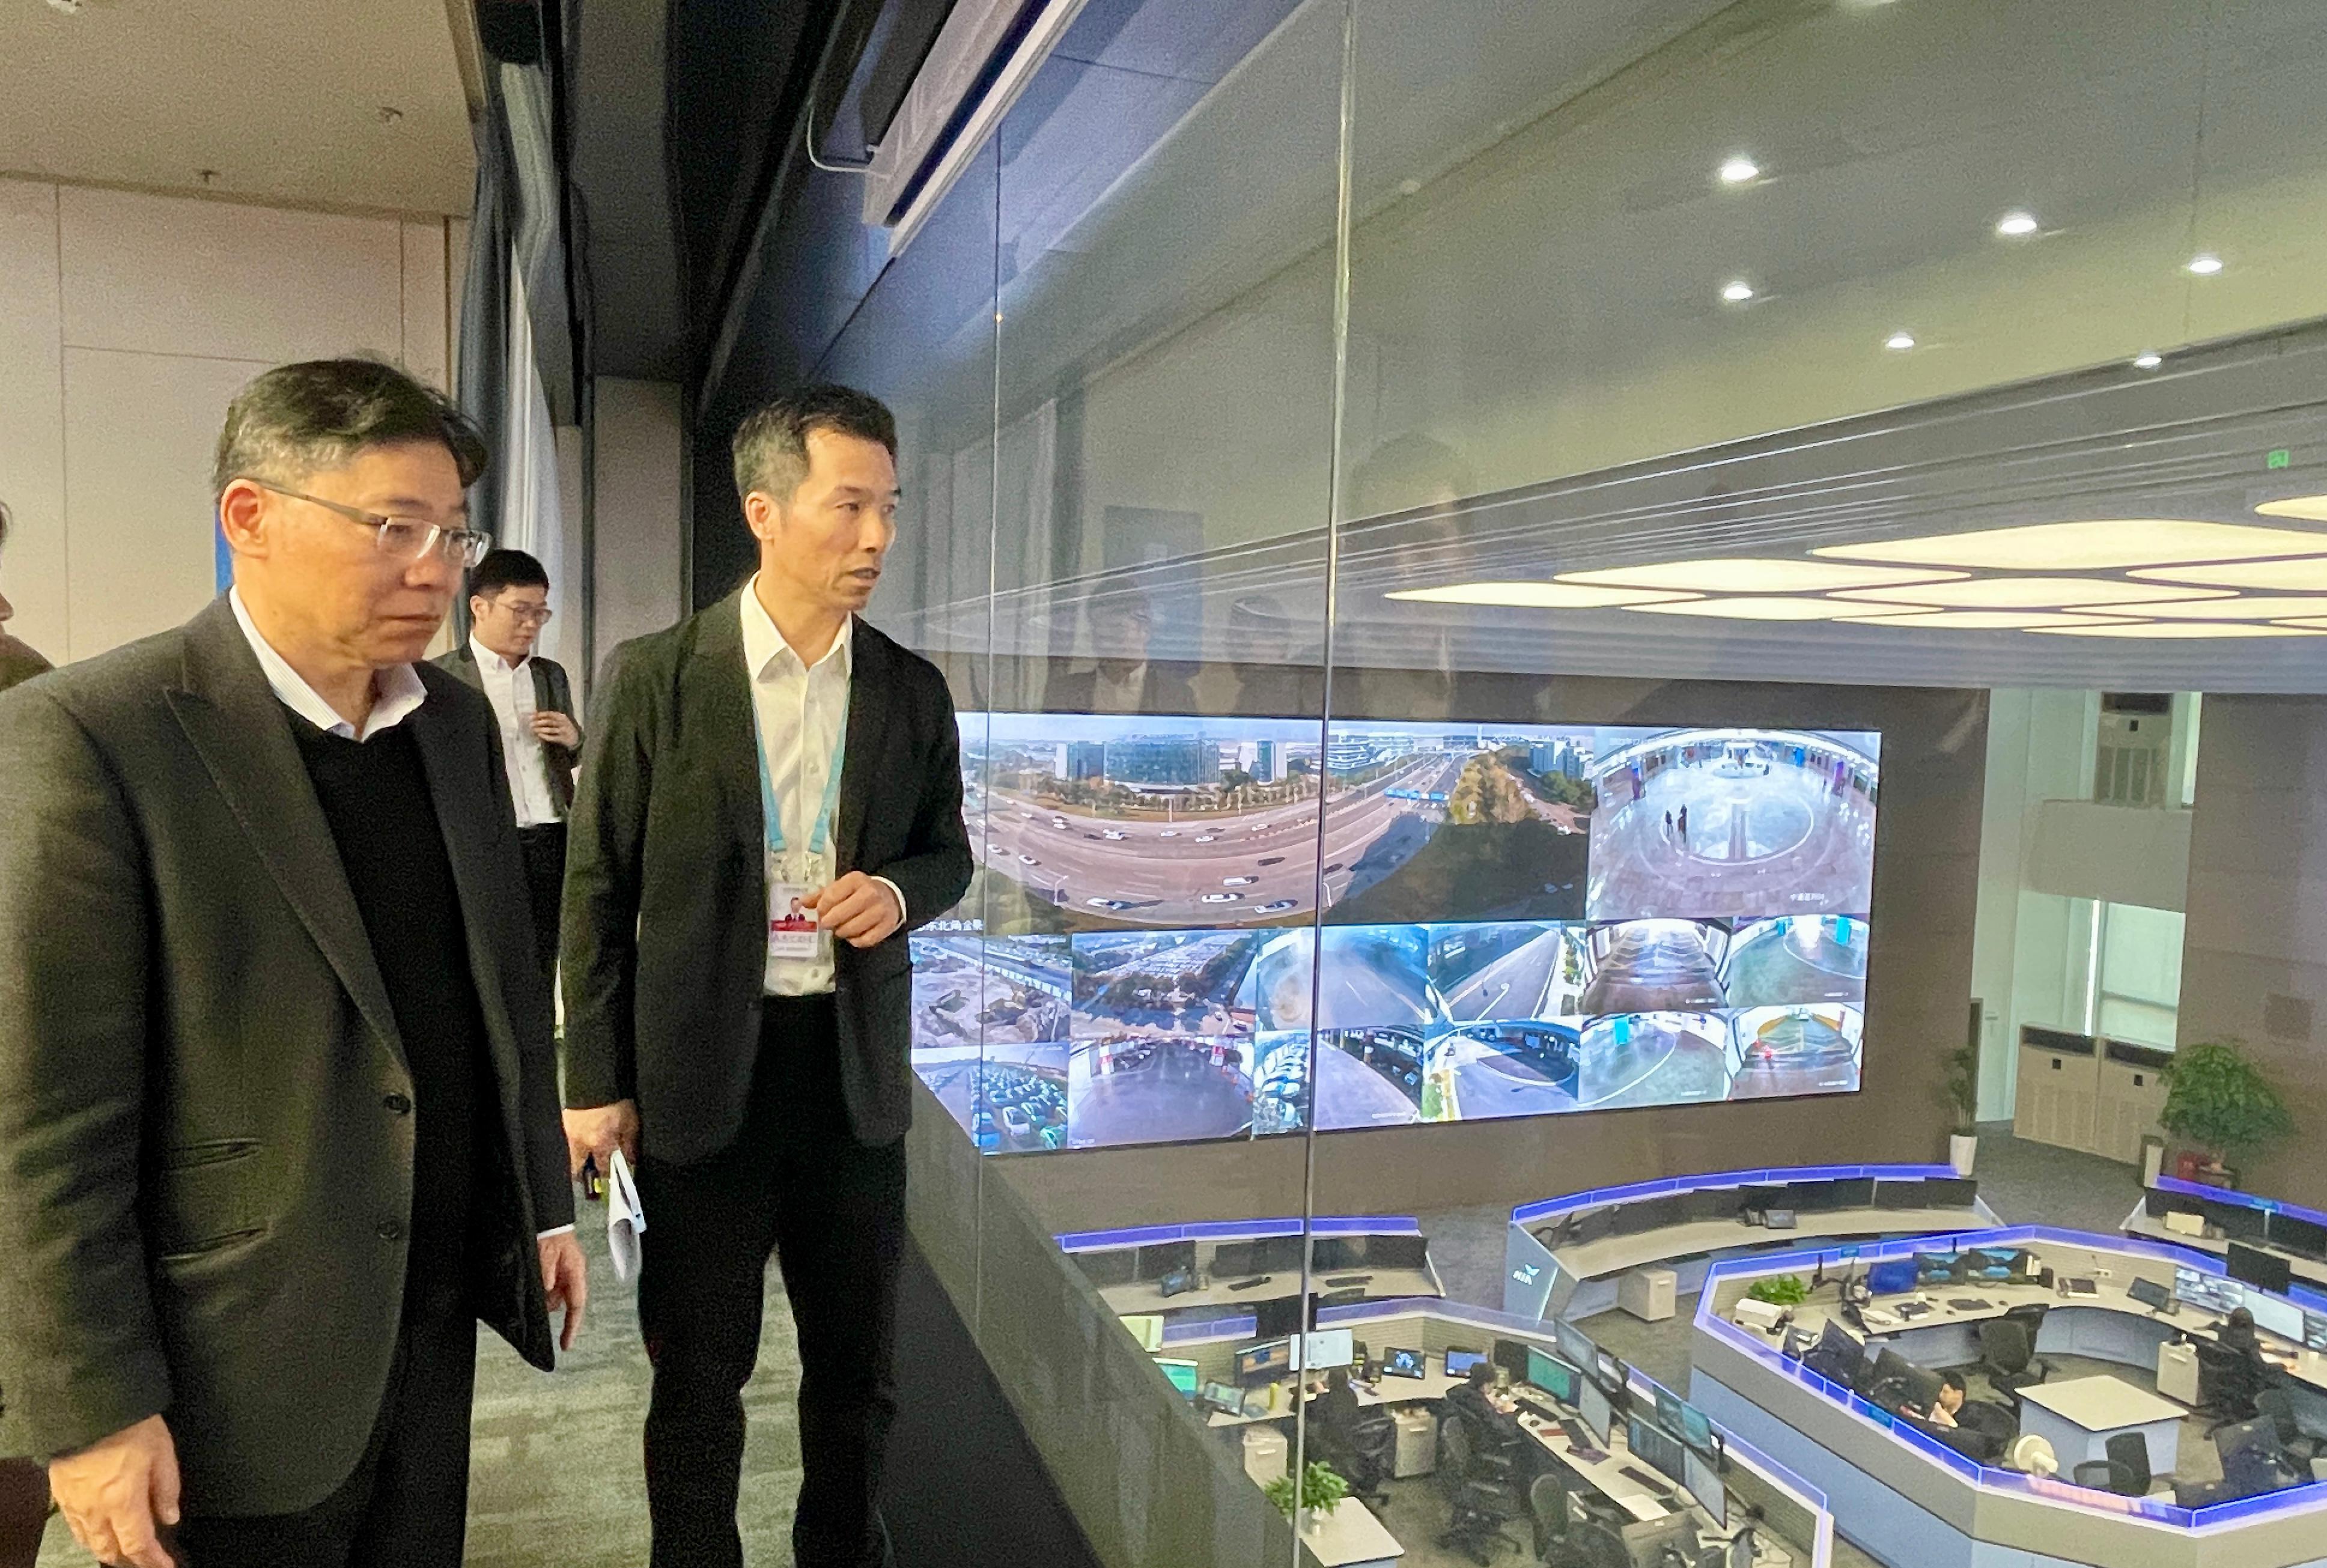 The Secretary for Transport and Logistics, Mr Lam Sai-hung (left), visits Hangzhou Xiaoshan International Airport today (December 7) and receives a briefing by representatives of the Airport Authority Hong Kong on the latest development at Hangzhou Xiaoshan International Airport.